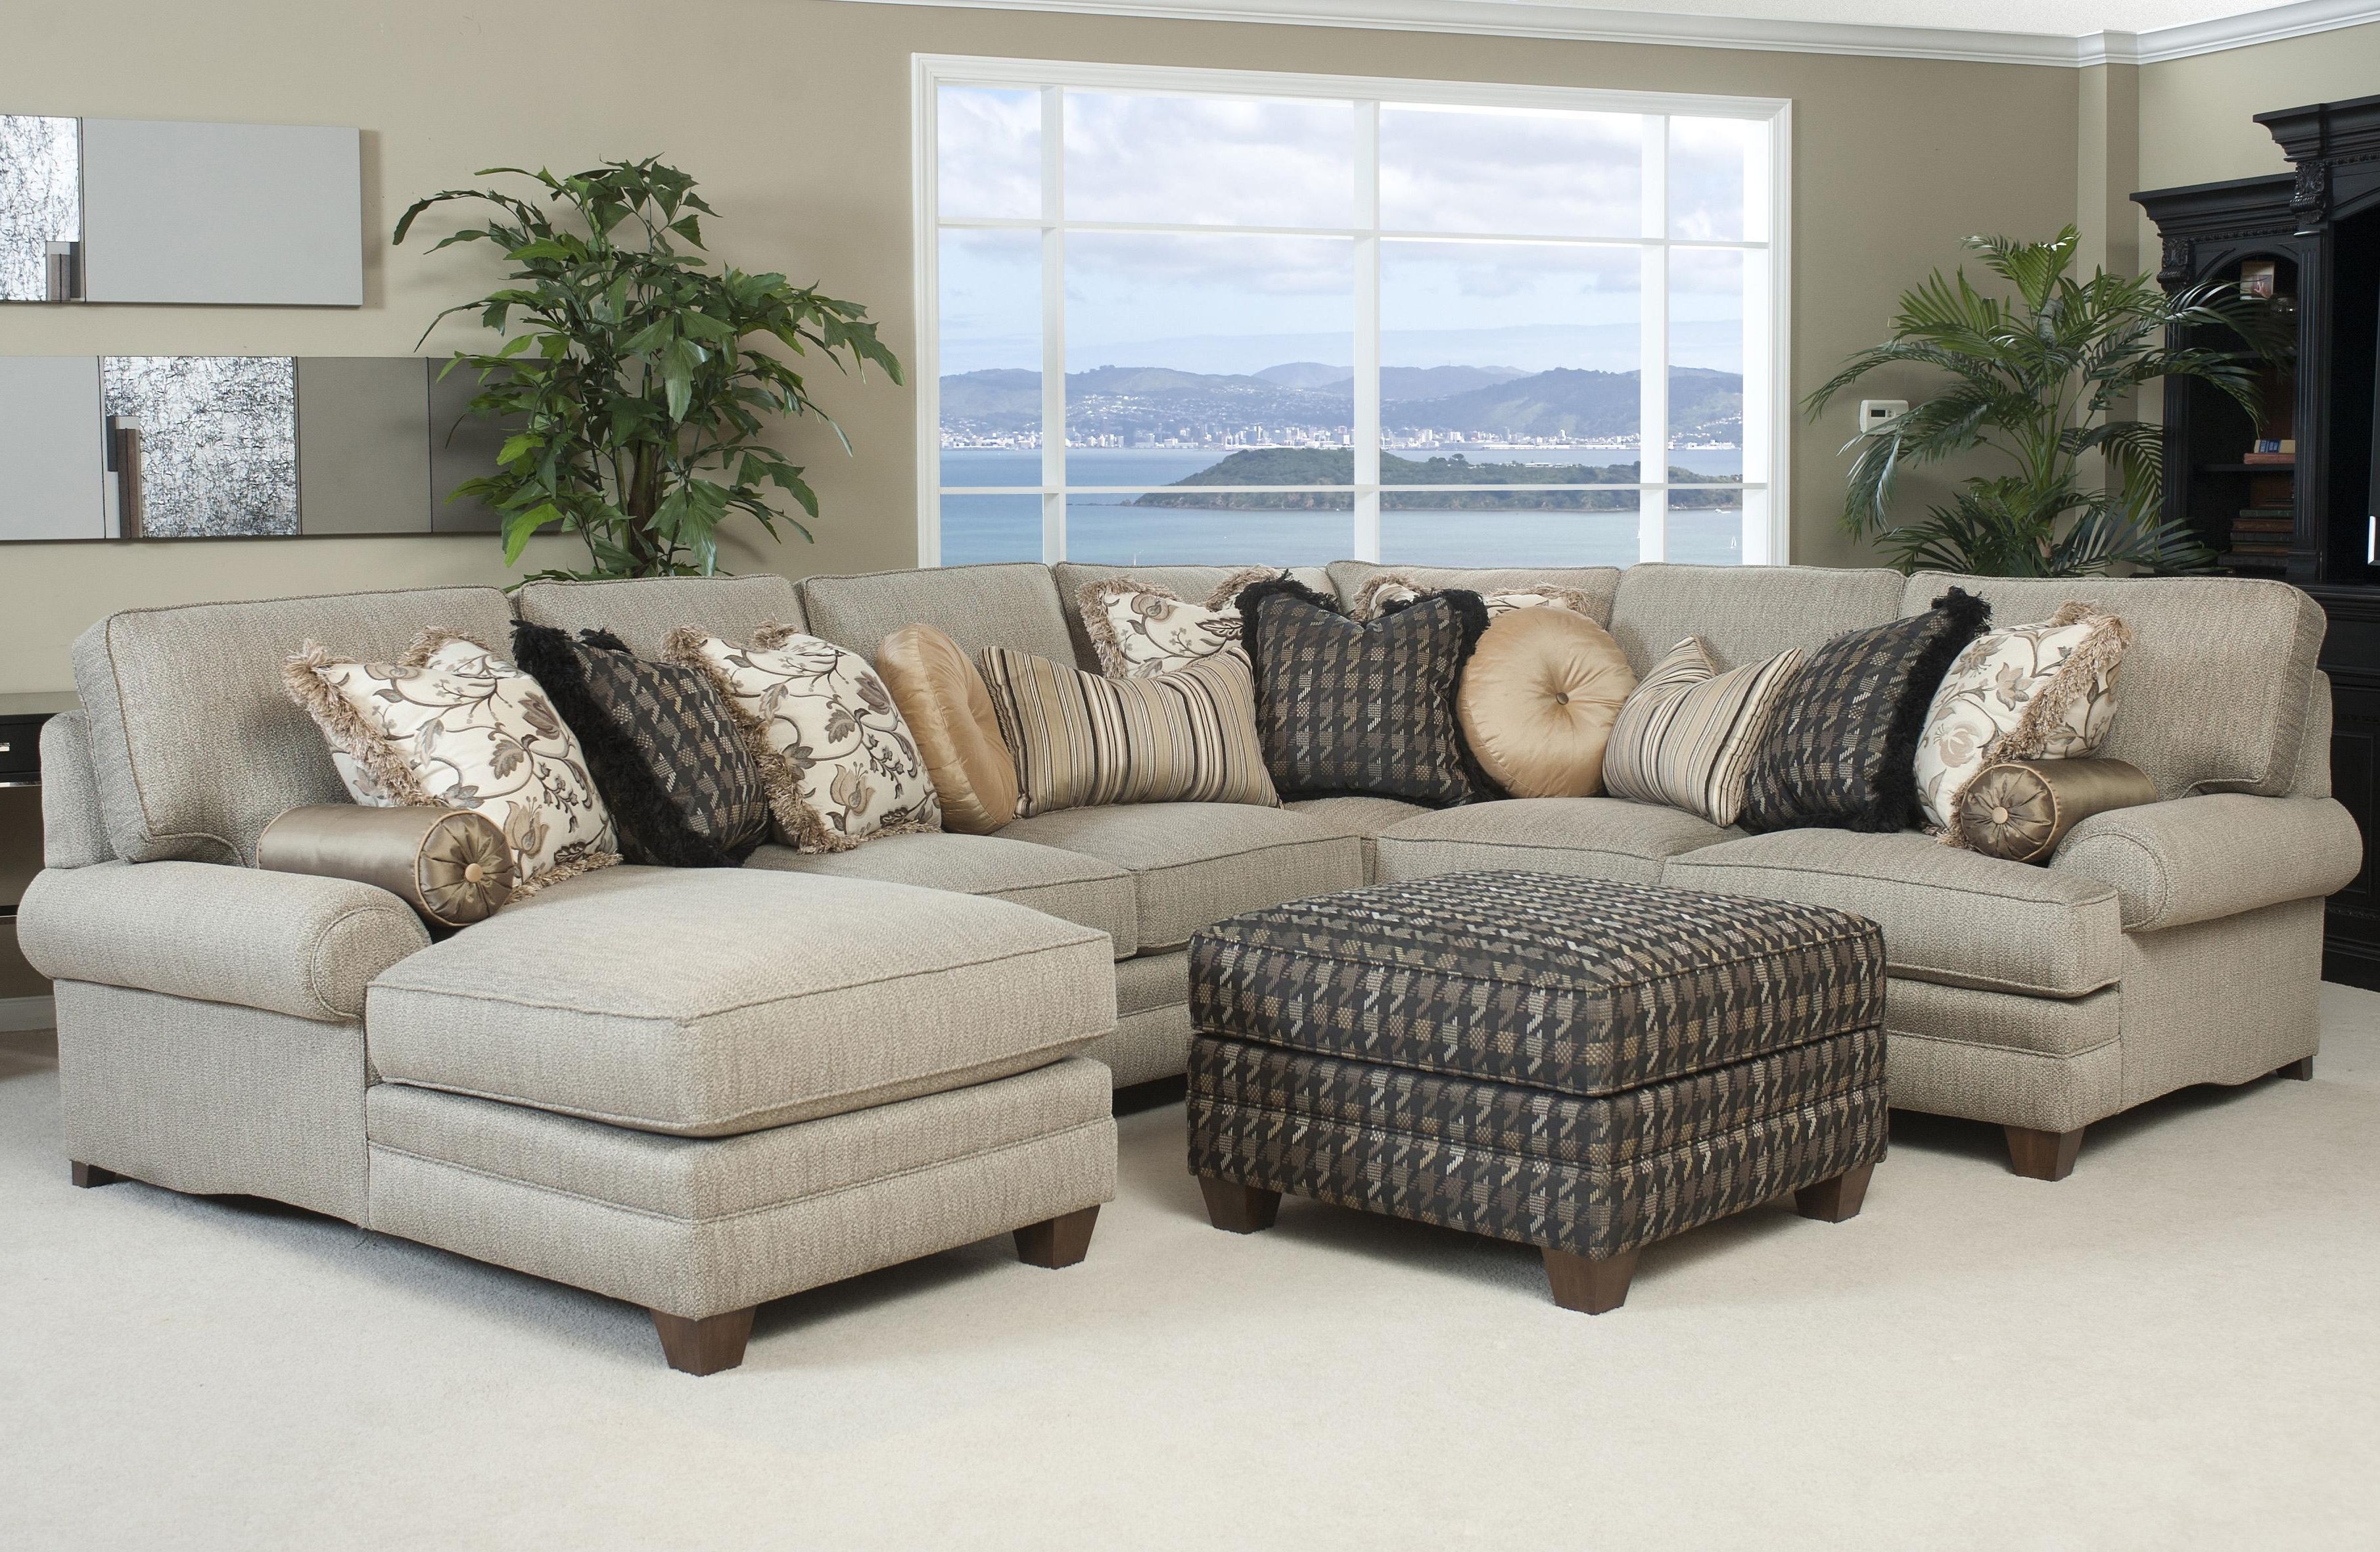 Well Liked Great Sofa Sectionals With Chaise 54 About Remodel Sectional Sofas With Jcpenney Sectional Sofas (View 4 of 15)